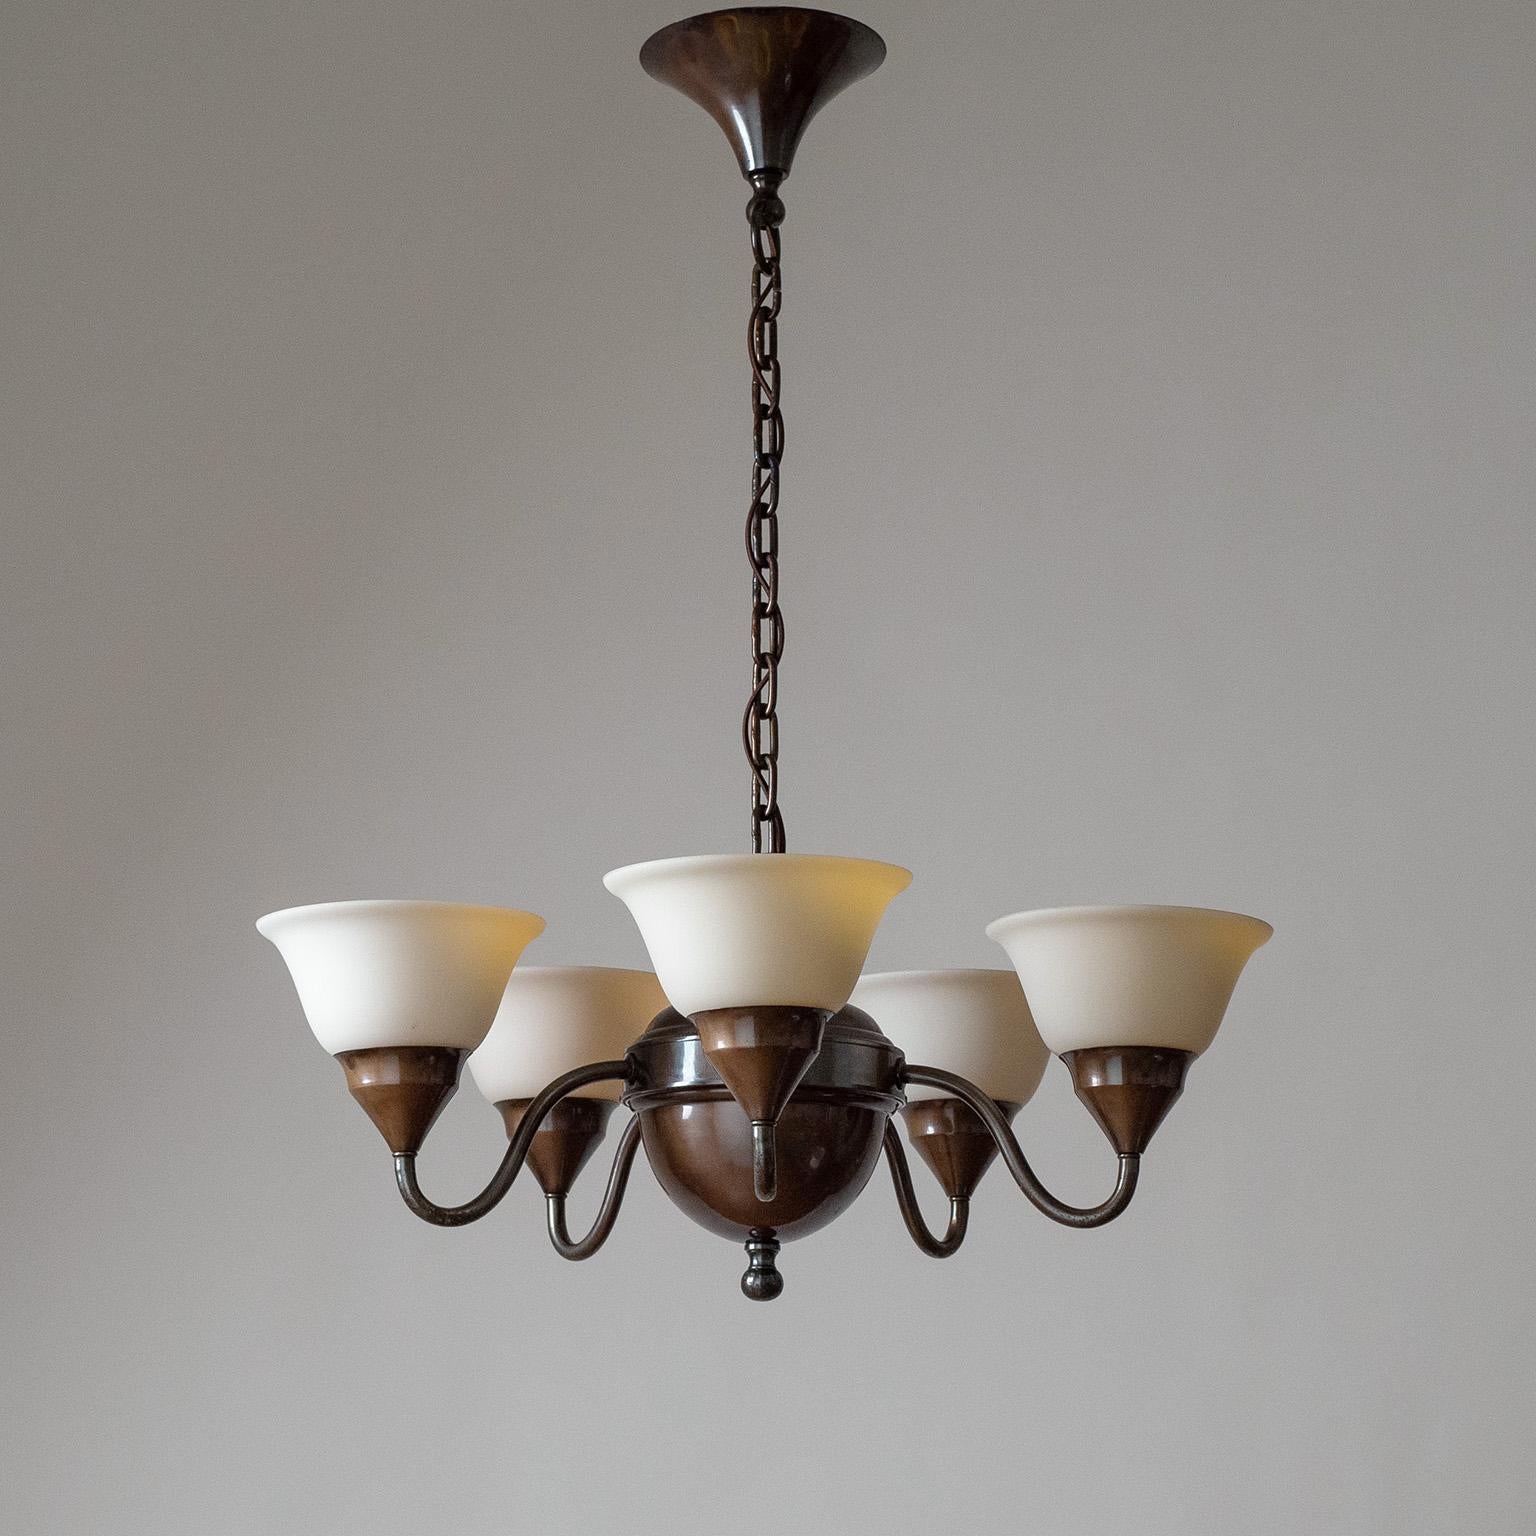 Swedish patinated brass chandelier from the 1920s. The satin glass diffusers are enameled on the inside in bright yellow/orange (each a slightly different nuance) for a warm glow when lit. Very good original condition with a light patina. Five